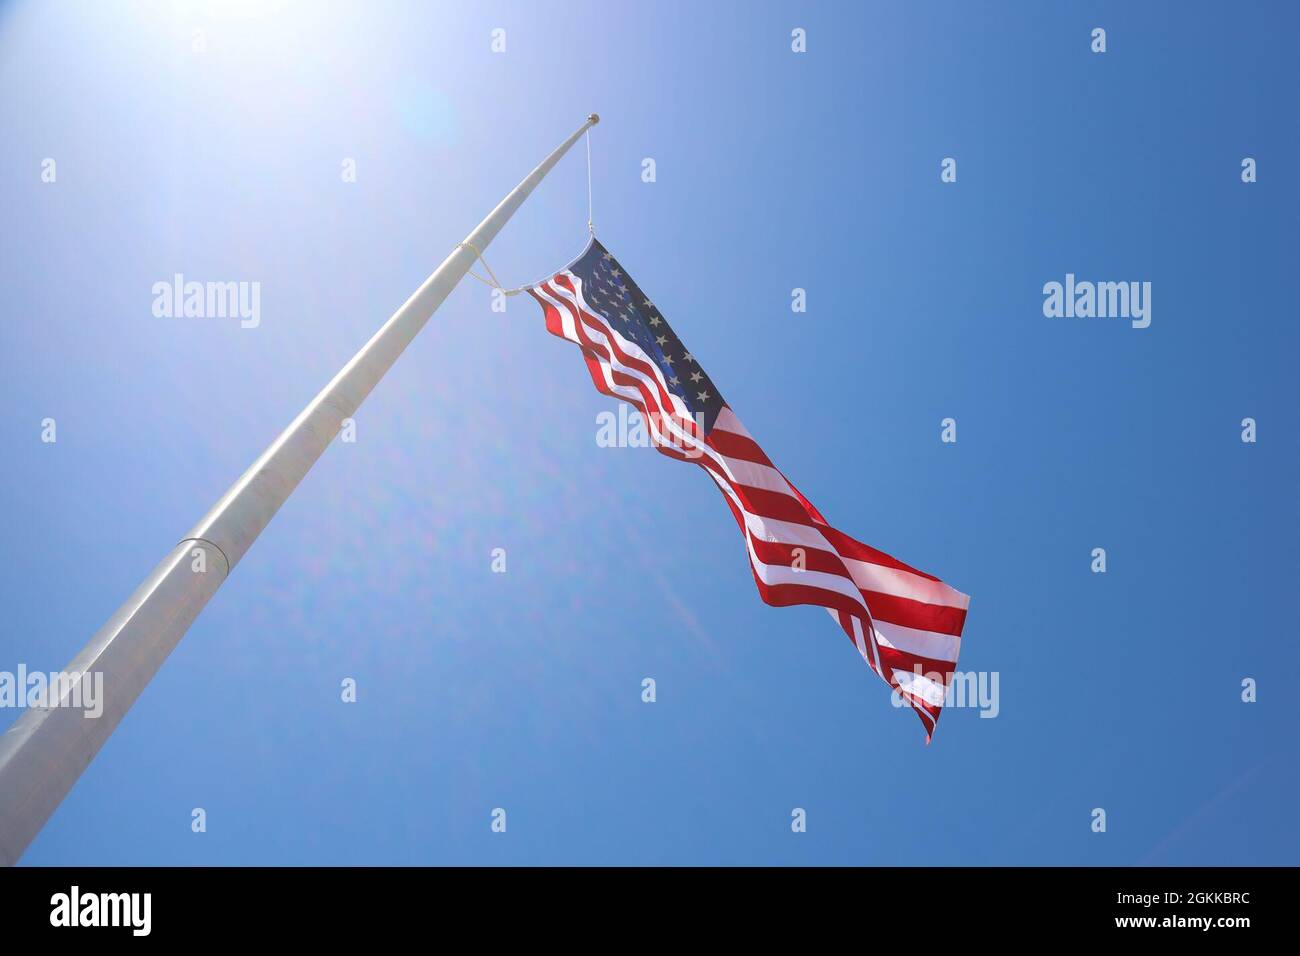 The American flag flies high over Marine Corps Air Station (MCAS) Yuma, May 14, 2021. This was the first time a flag rose on the new flagpole at MCAS Yuma. Stock Photo